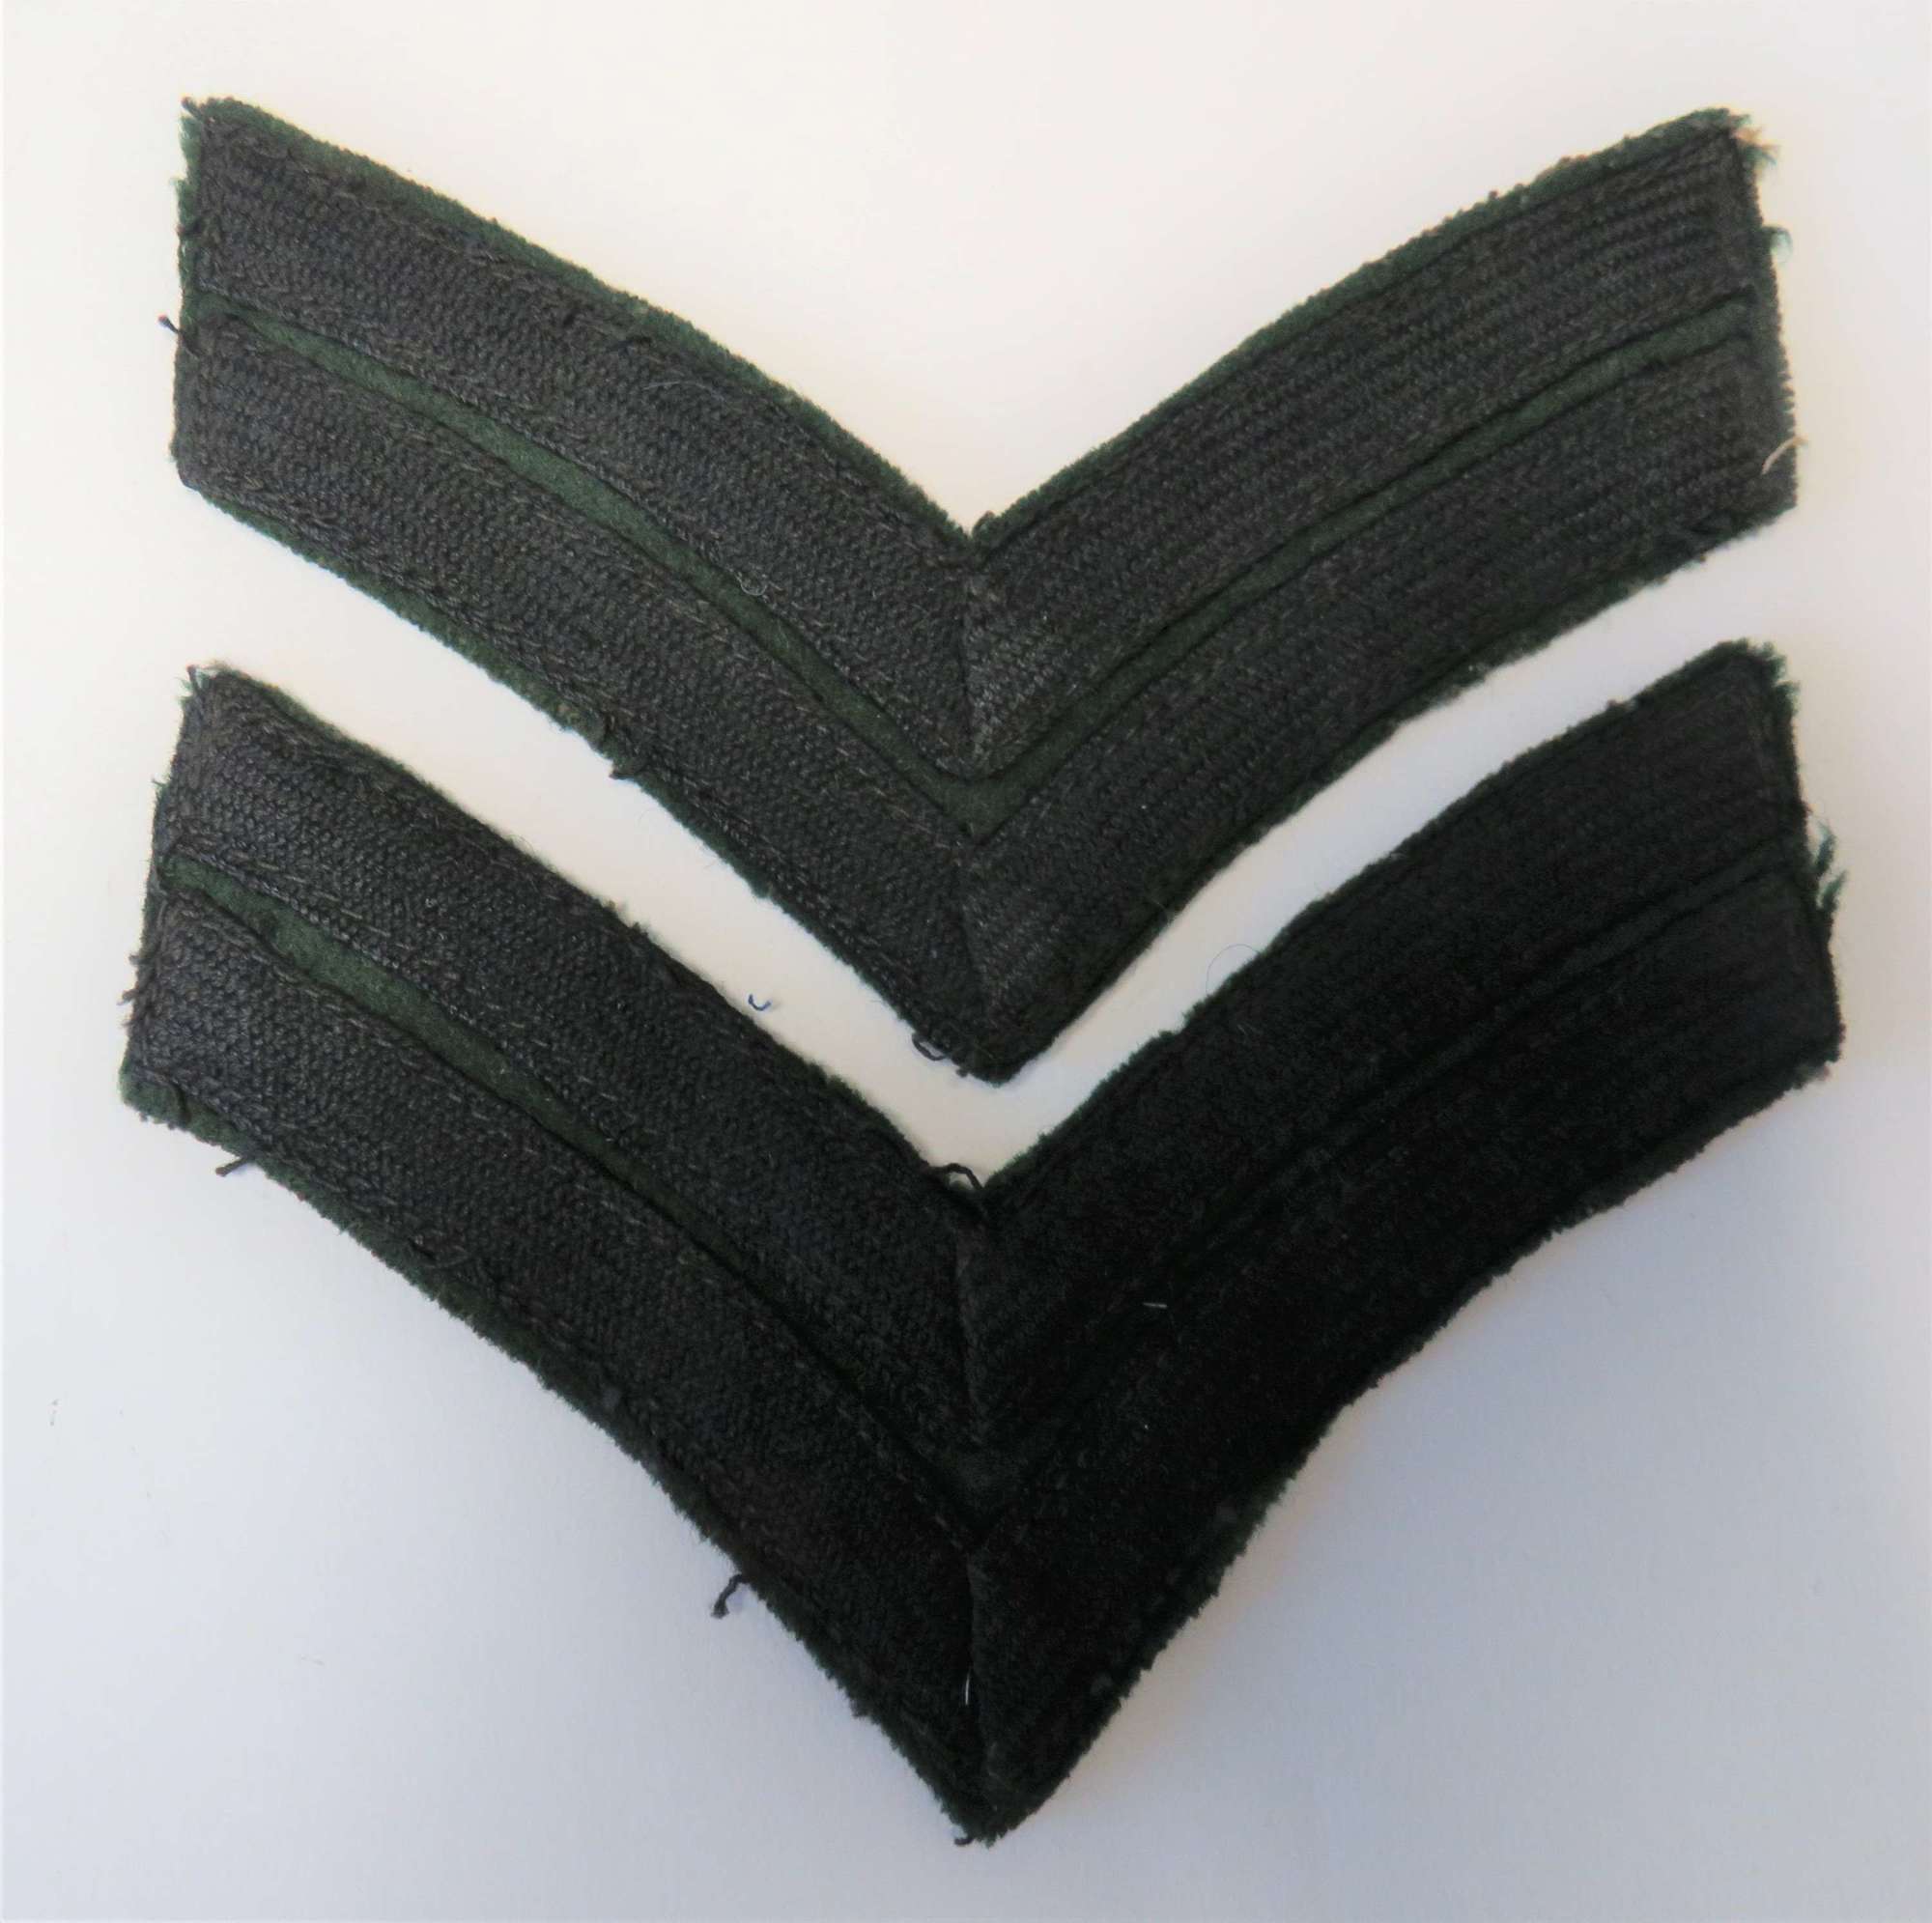 Pair of Rifles Corporal Stripes